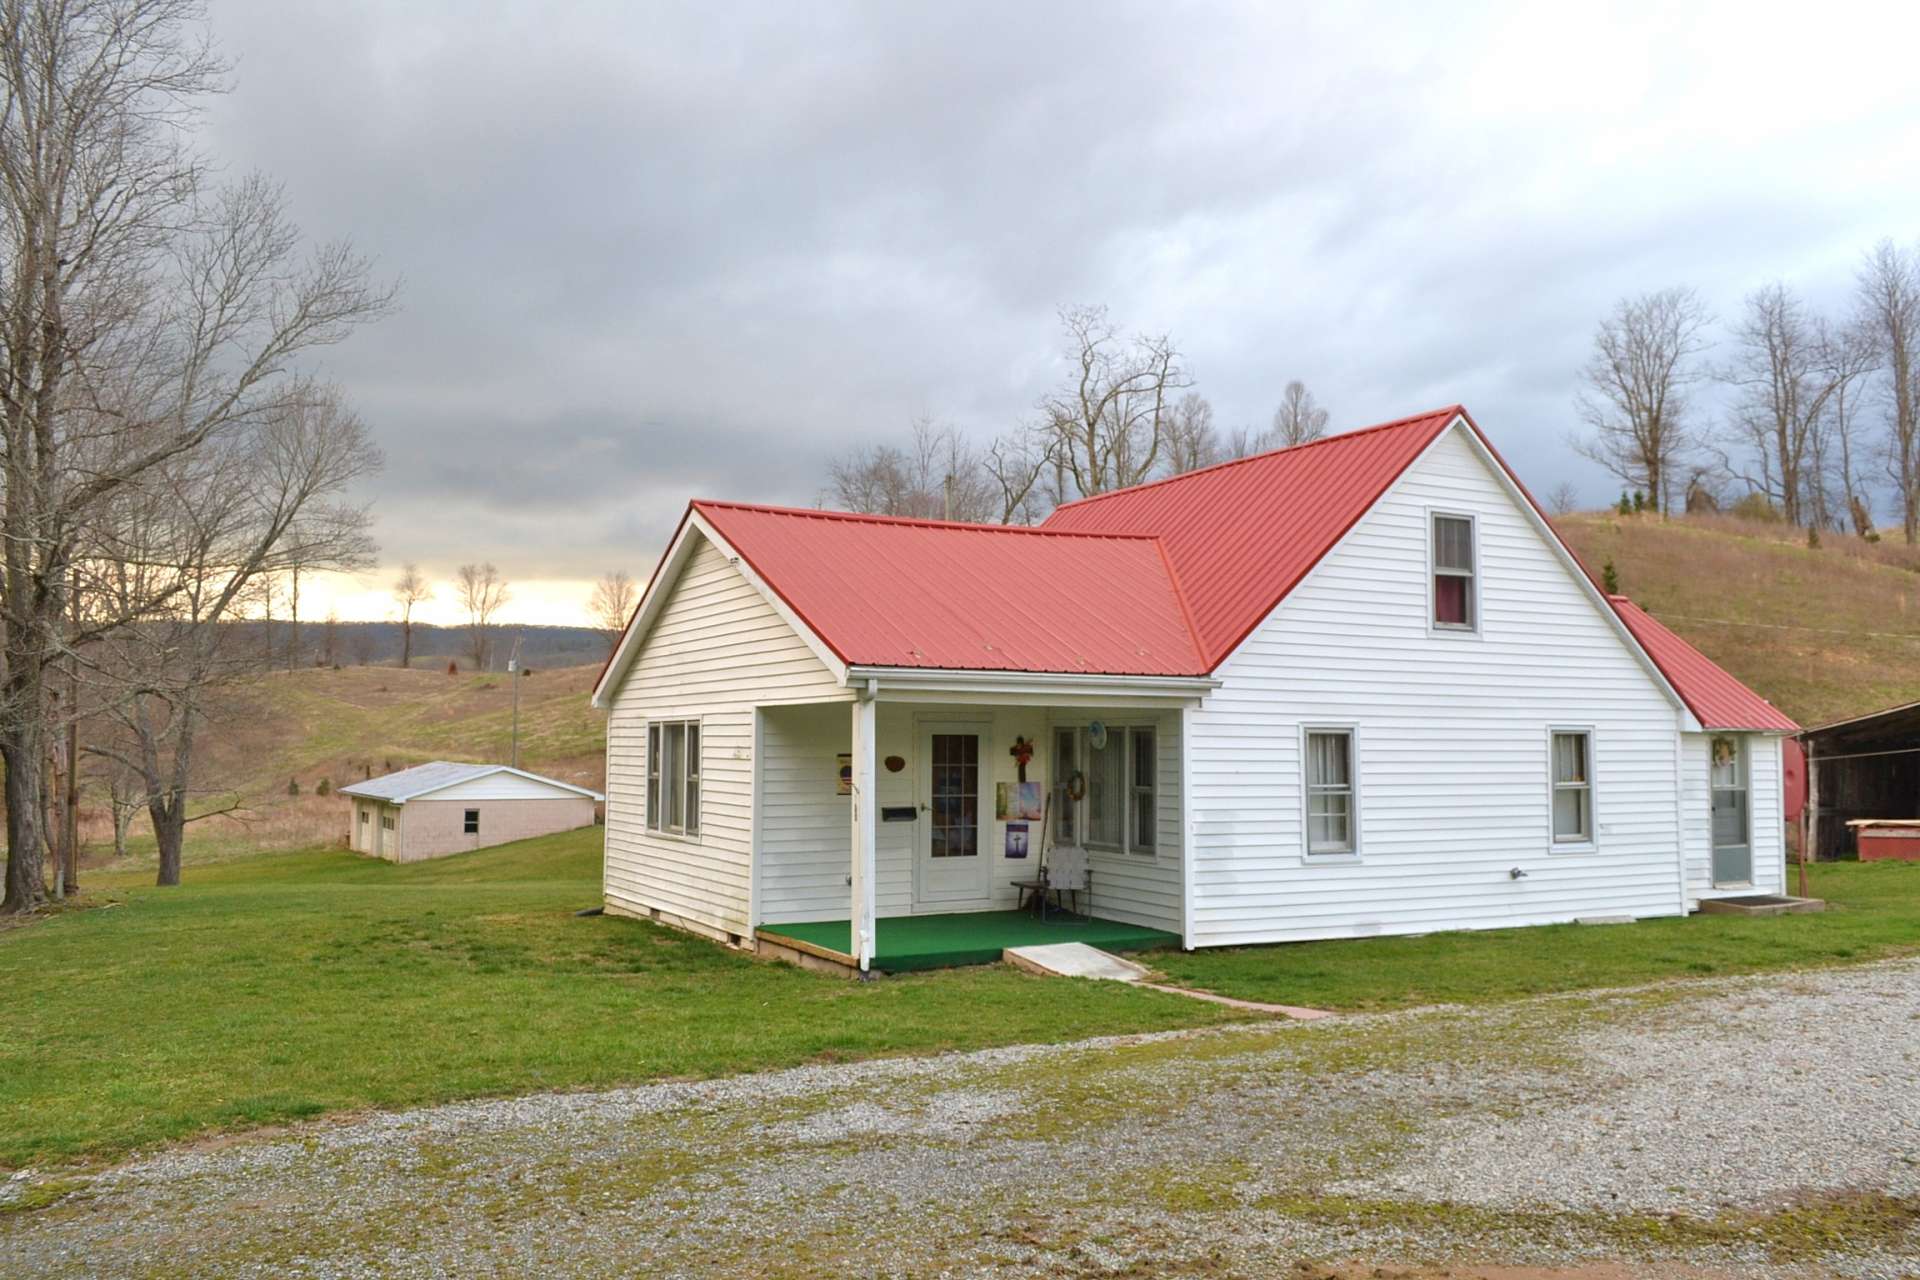 The country cozy 3-bedroom, 1-bath farmhouse offers old fashioned charm.